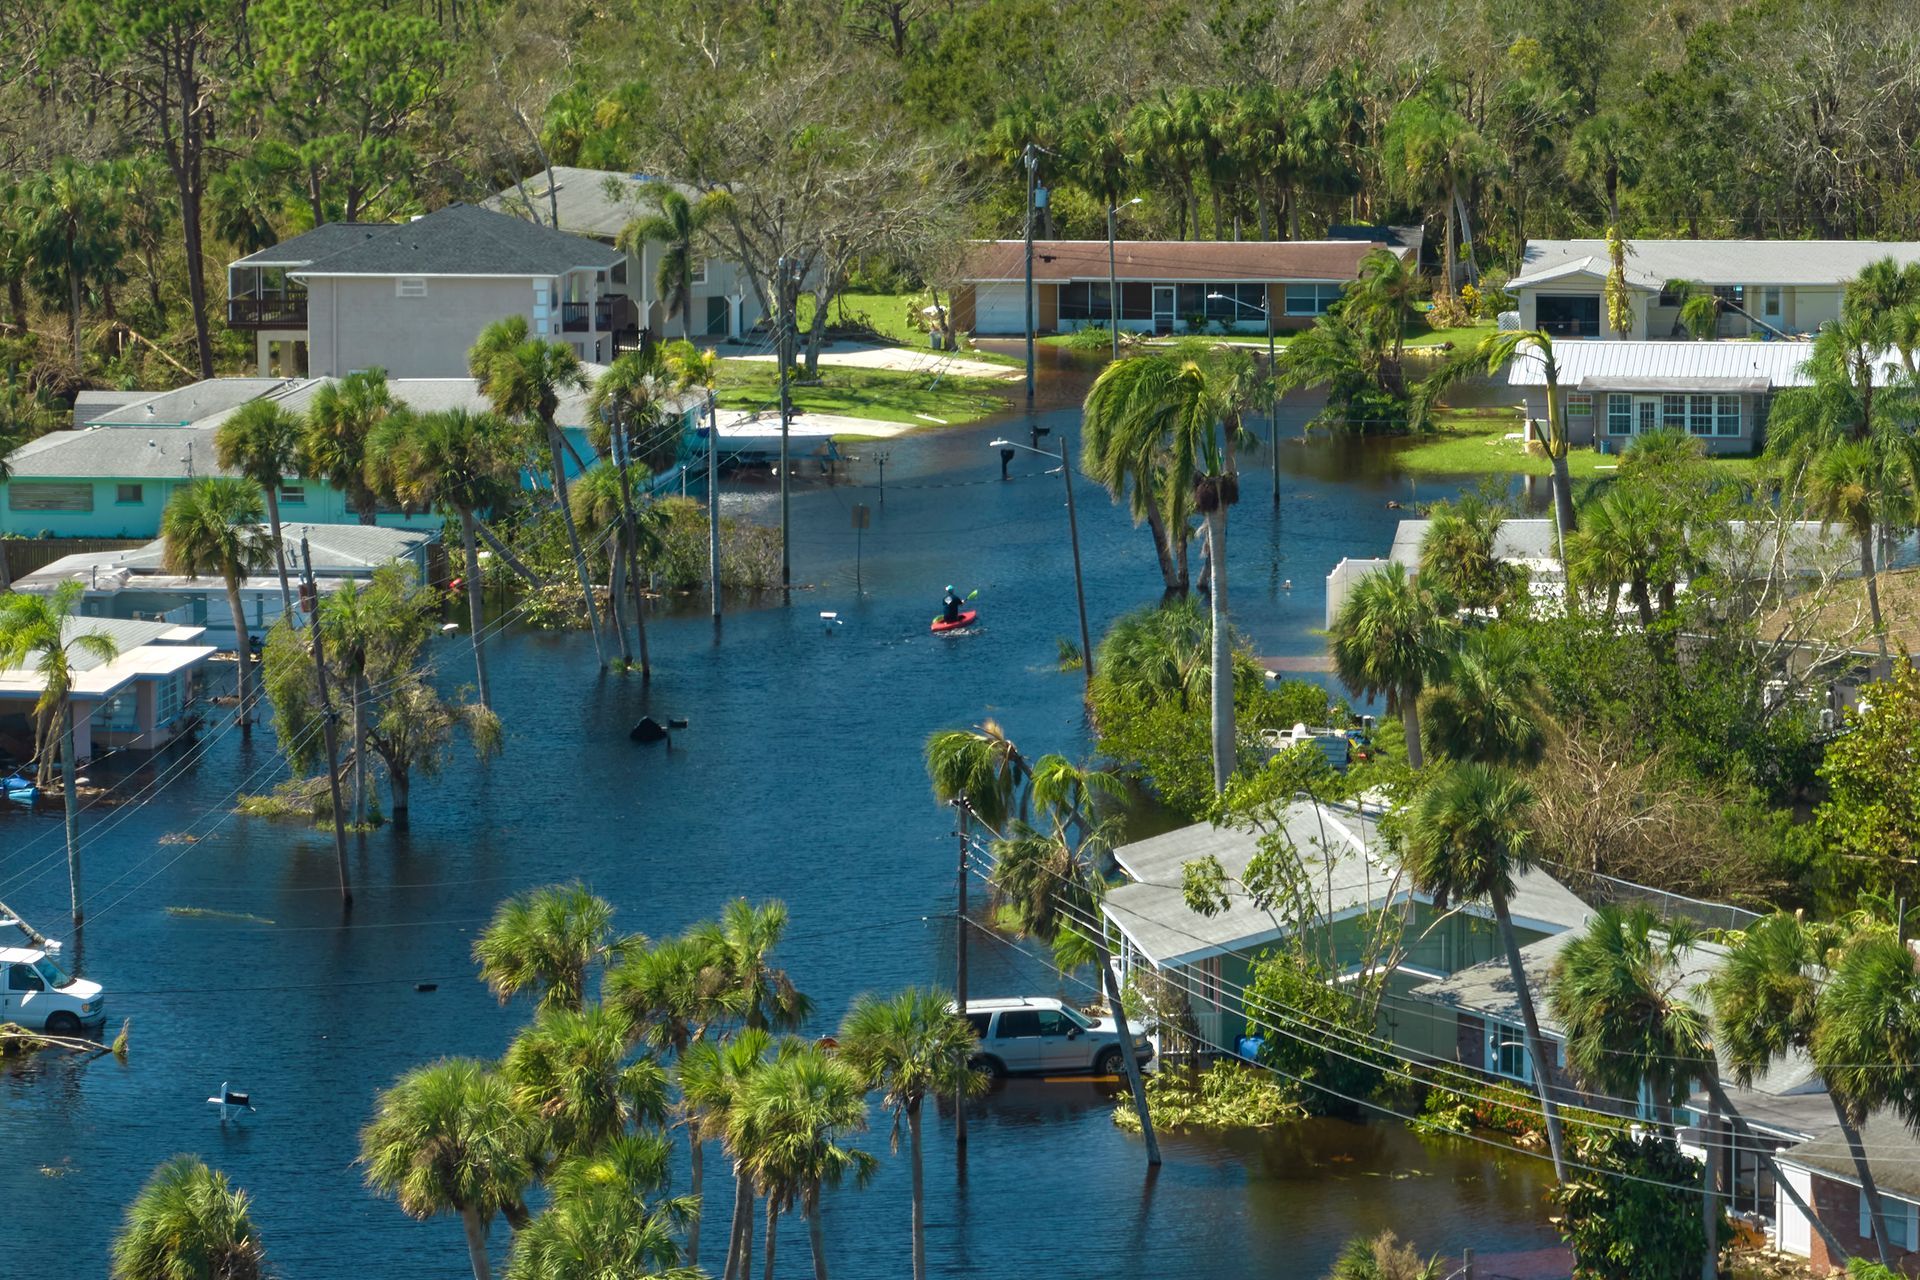 Home flooding in aftermath of hurricane